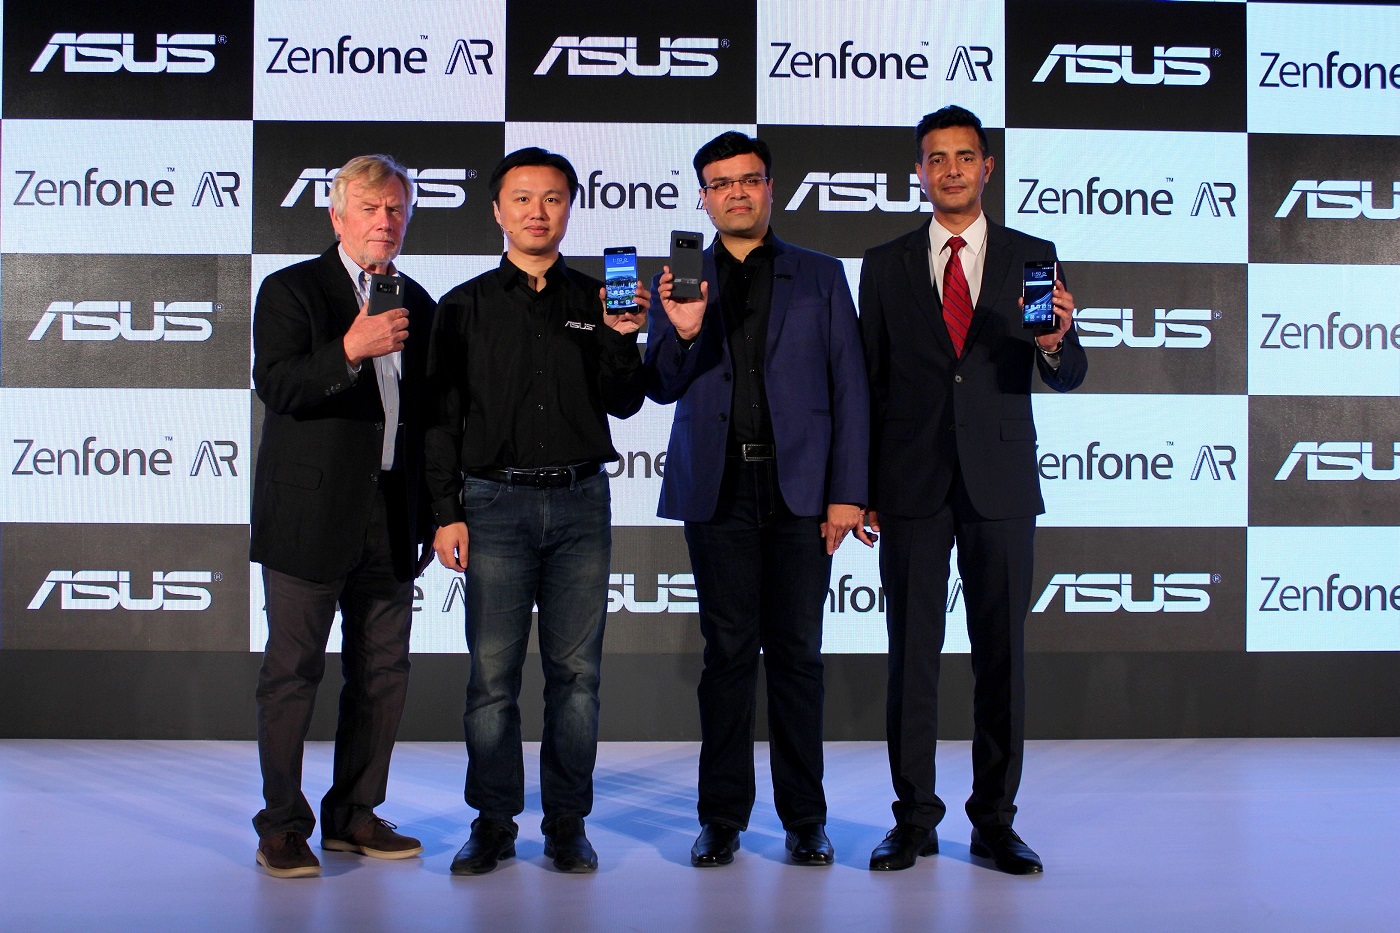 Asus Zenfone AR launched in India as a Flipkart exclusive device 8